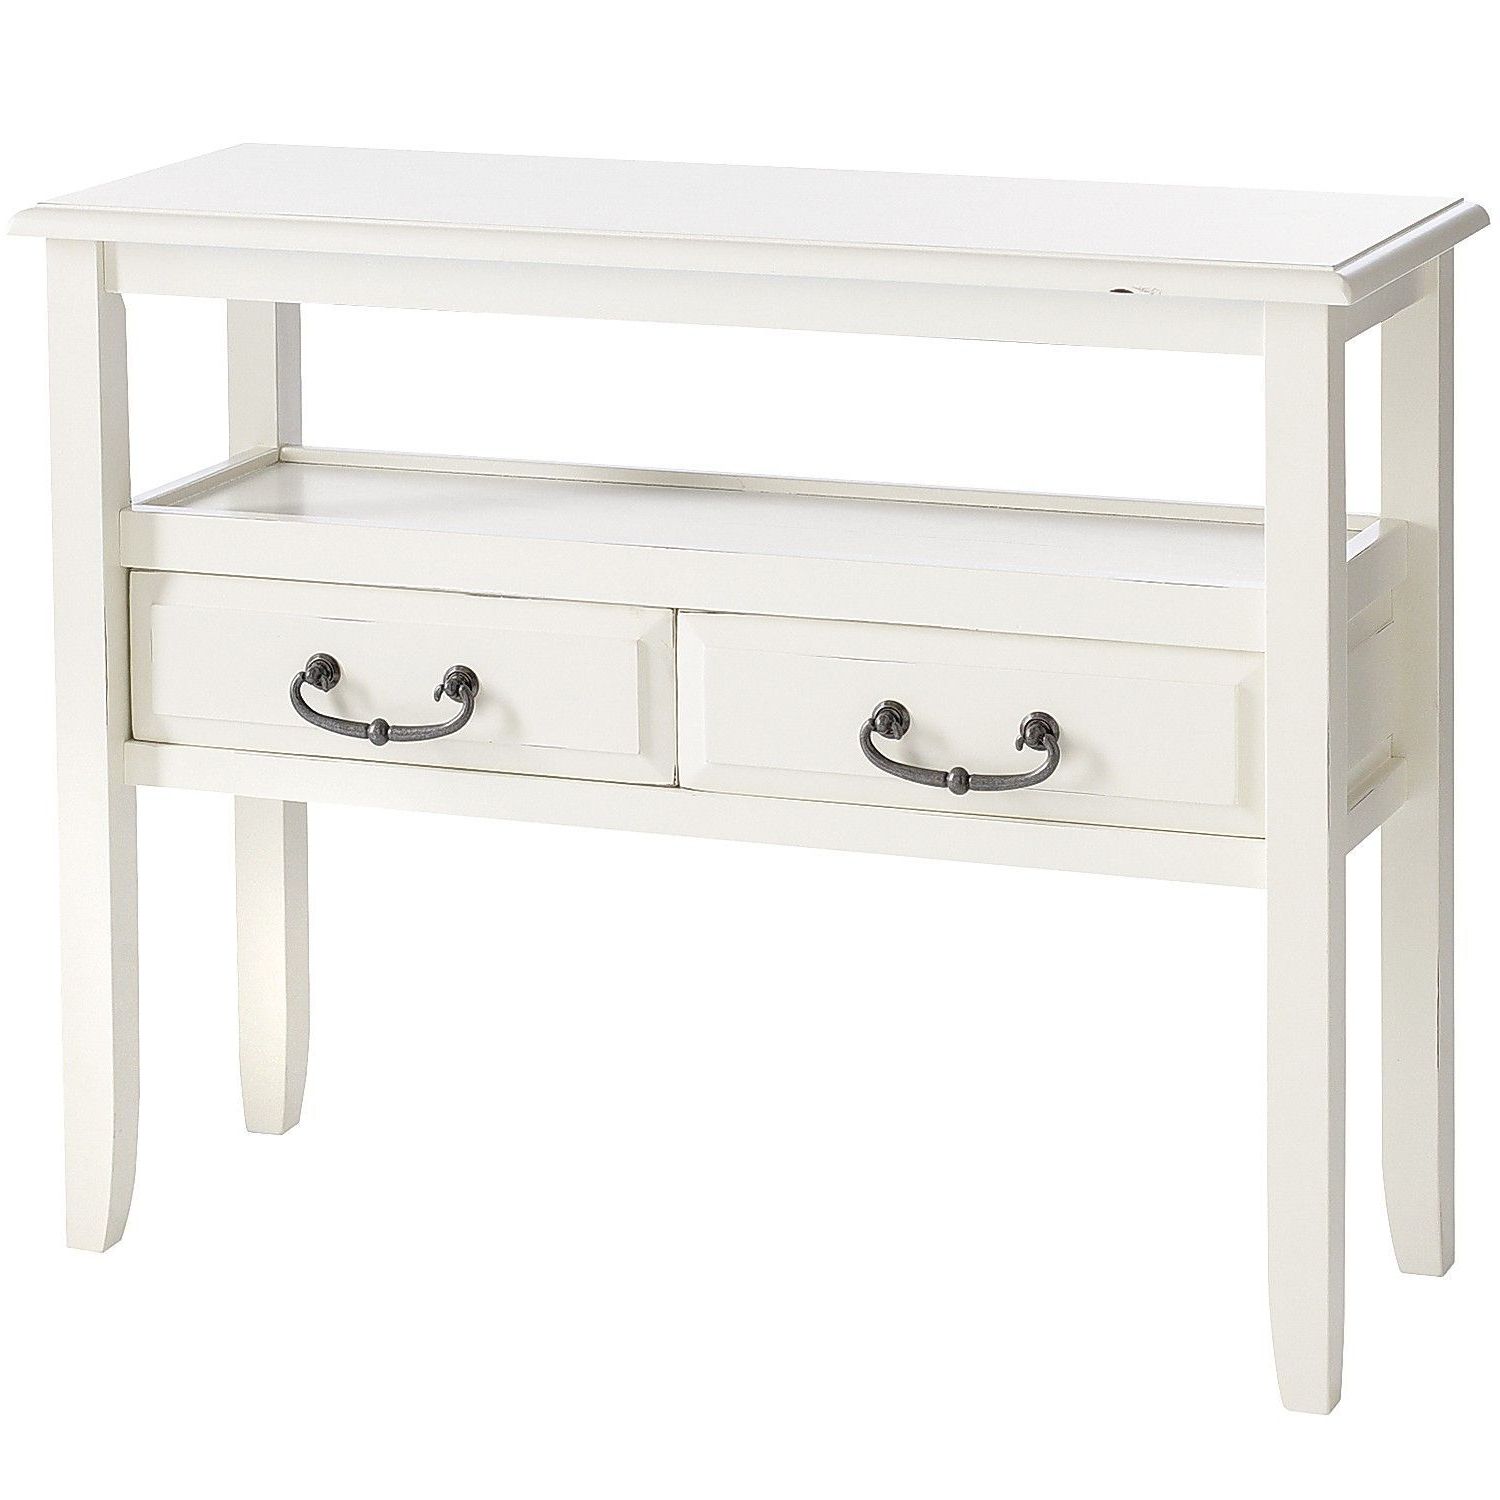 Current Anywhere Antique White Console Table With Pull Handles (View 6 of 20)